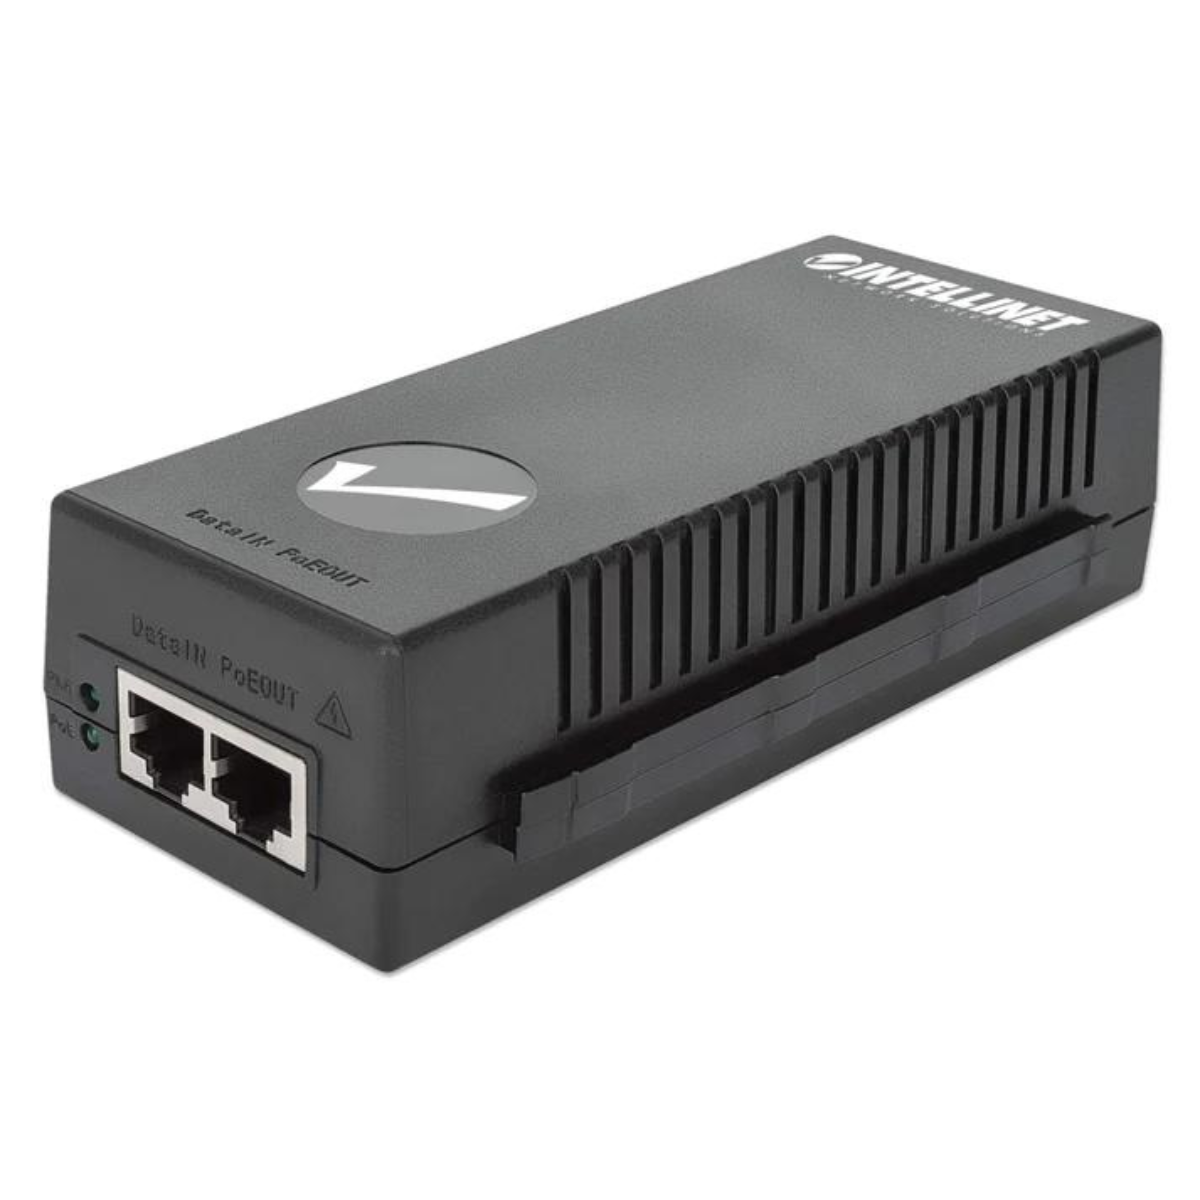 High-Power Gigabit Ultra PoE Injector with 60W Port, Wall-Mount Option